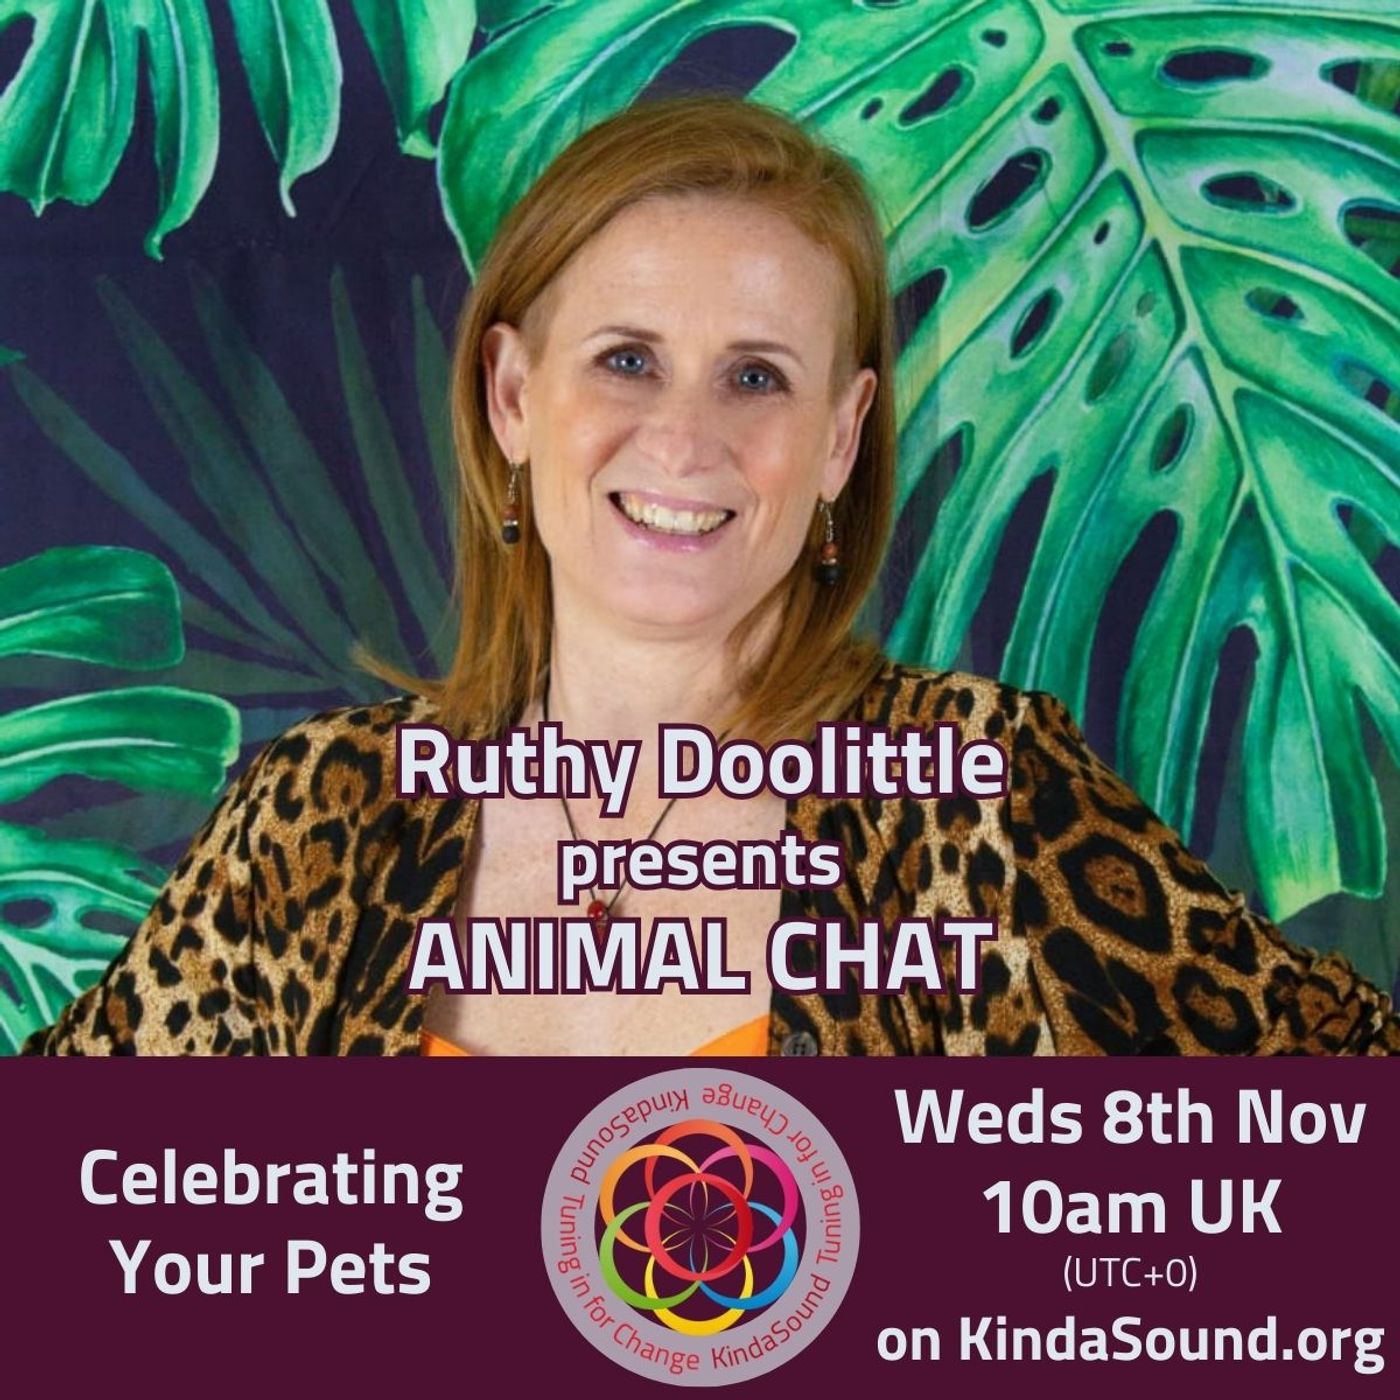 Celebrating Your Pets | Animal Chat with Ruthy Doolittle (Ep. 1)